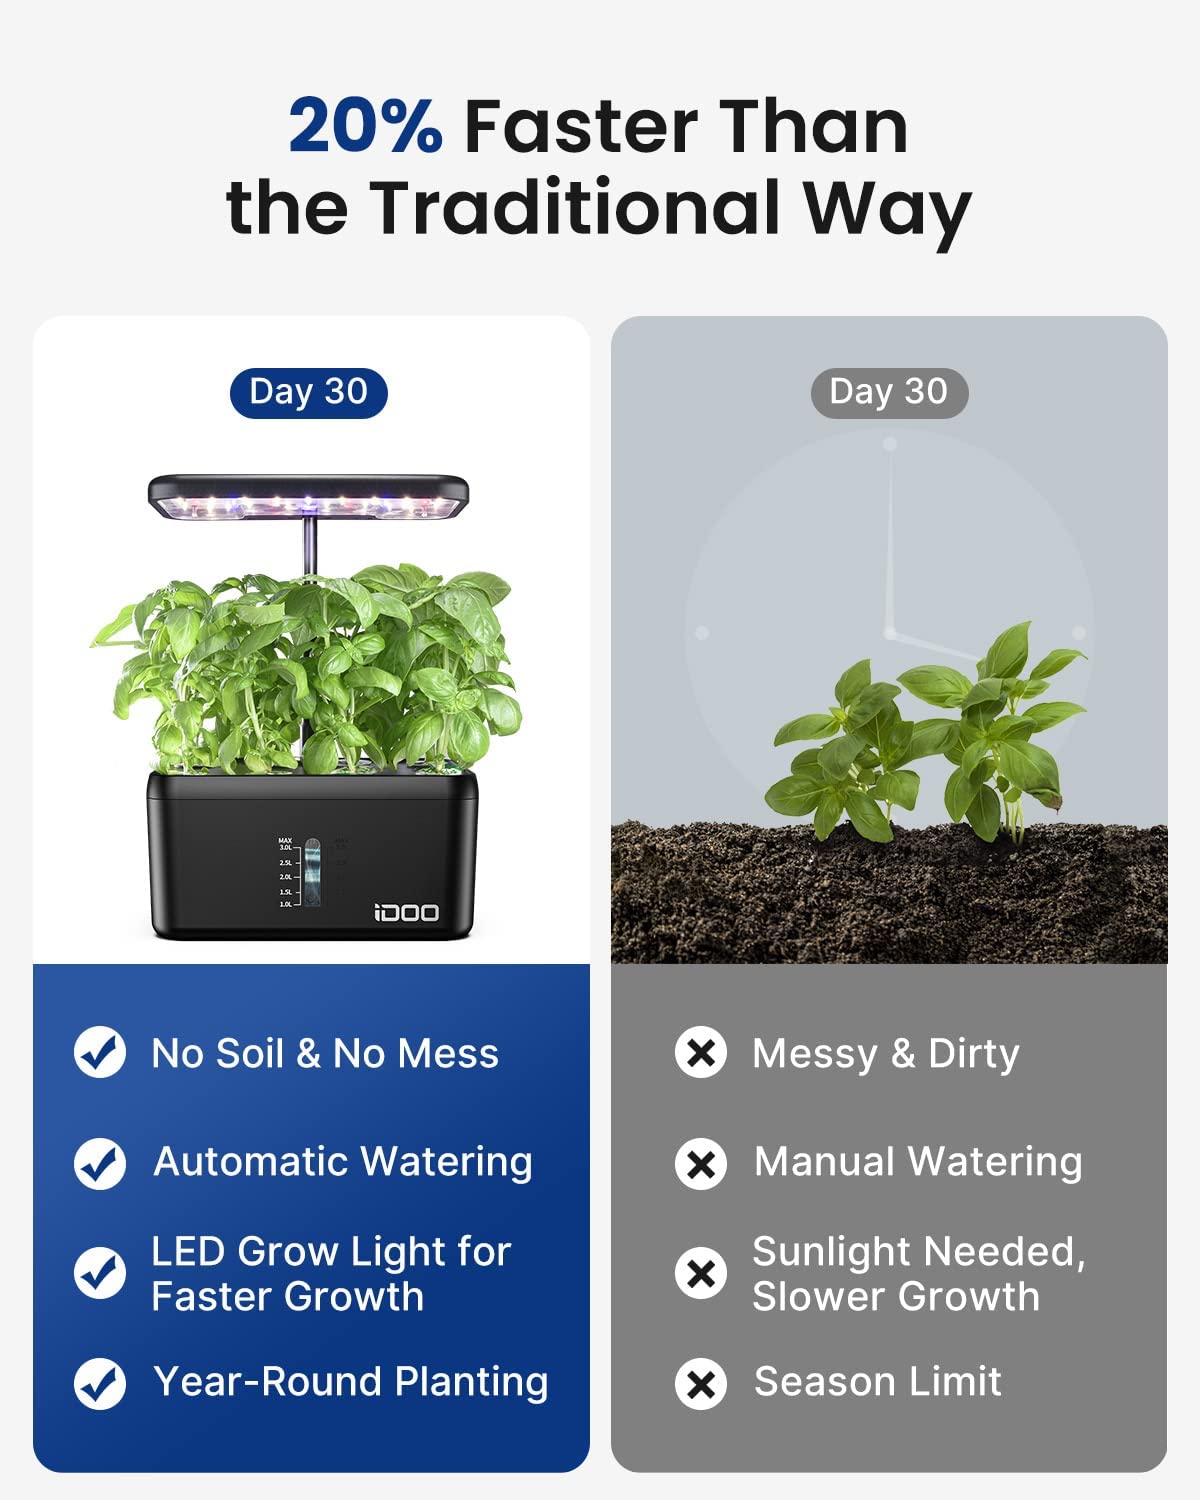 iDOO 8 Pods Indoor Garden - 8 Pods _wf_cus Best Seller fathersday Hydroponic Growing System sale by idoo